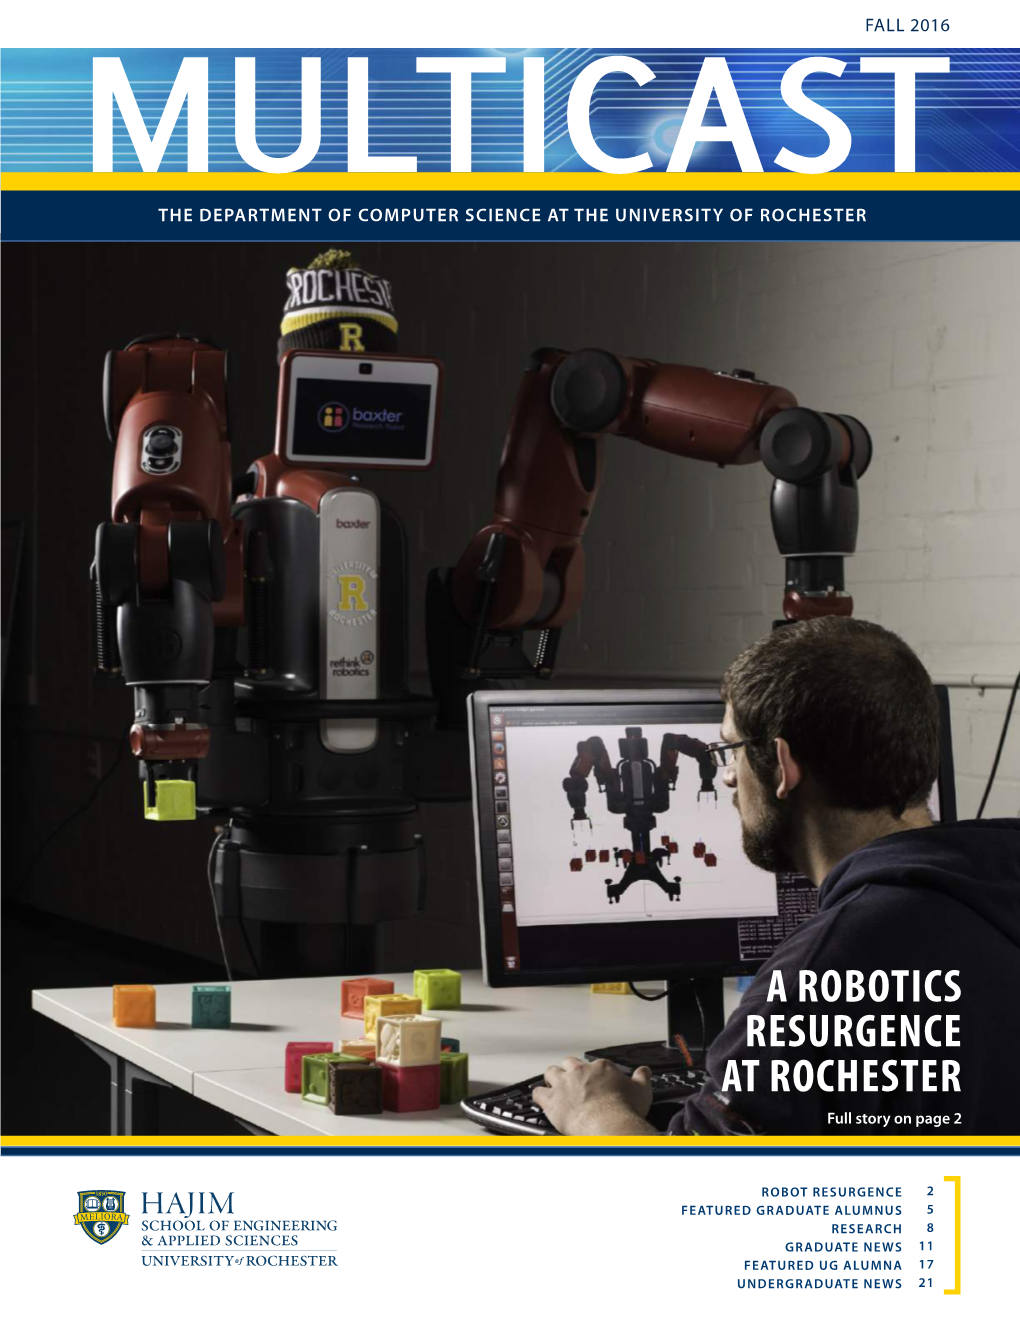 A ROBOTICS RESURGENCE at ROCHESTER Full Story on Page 2